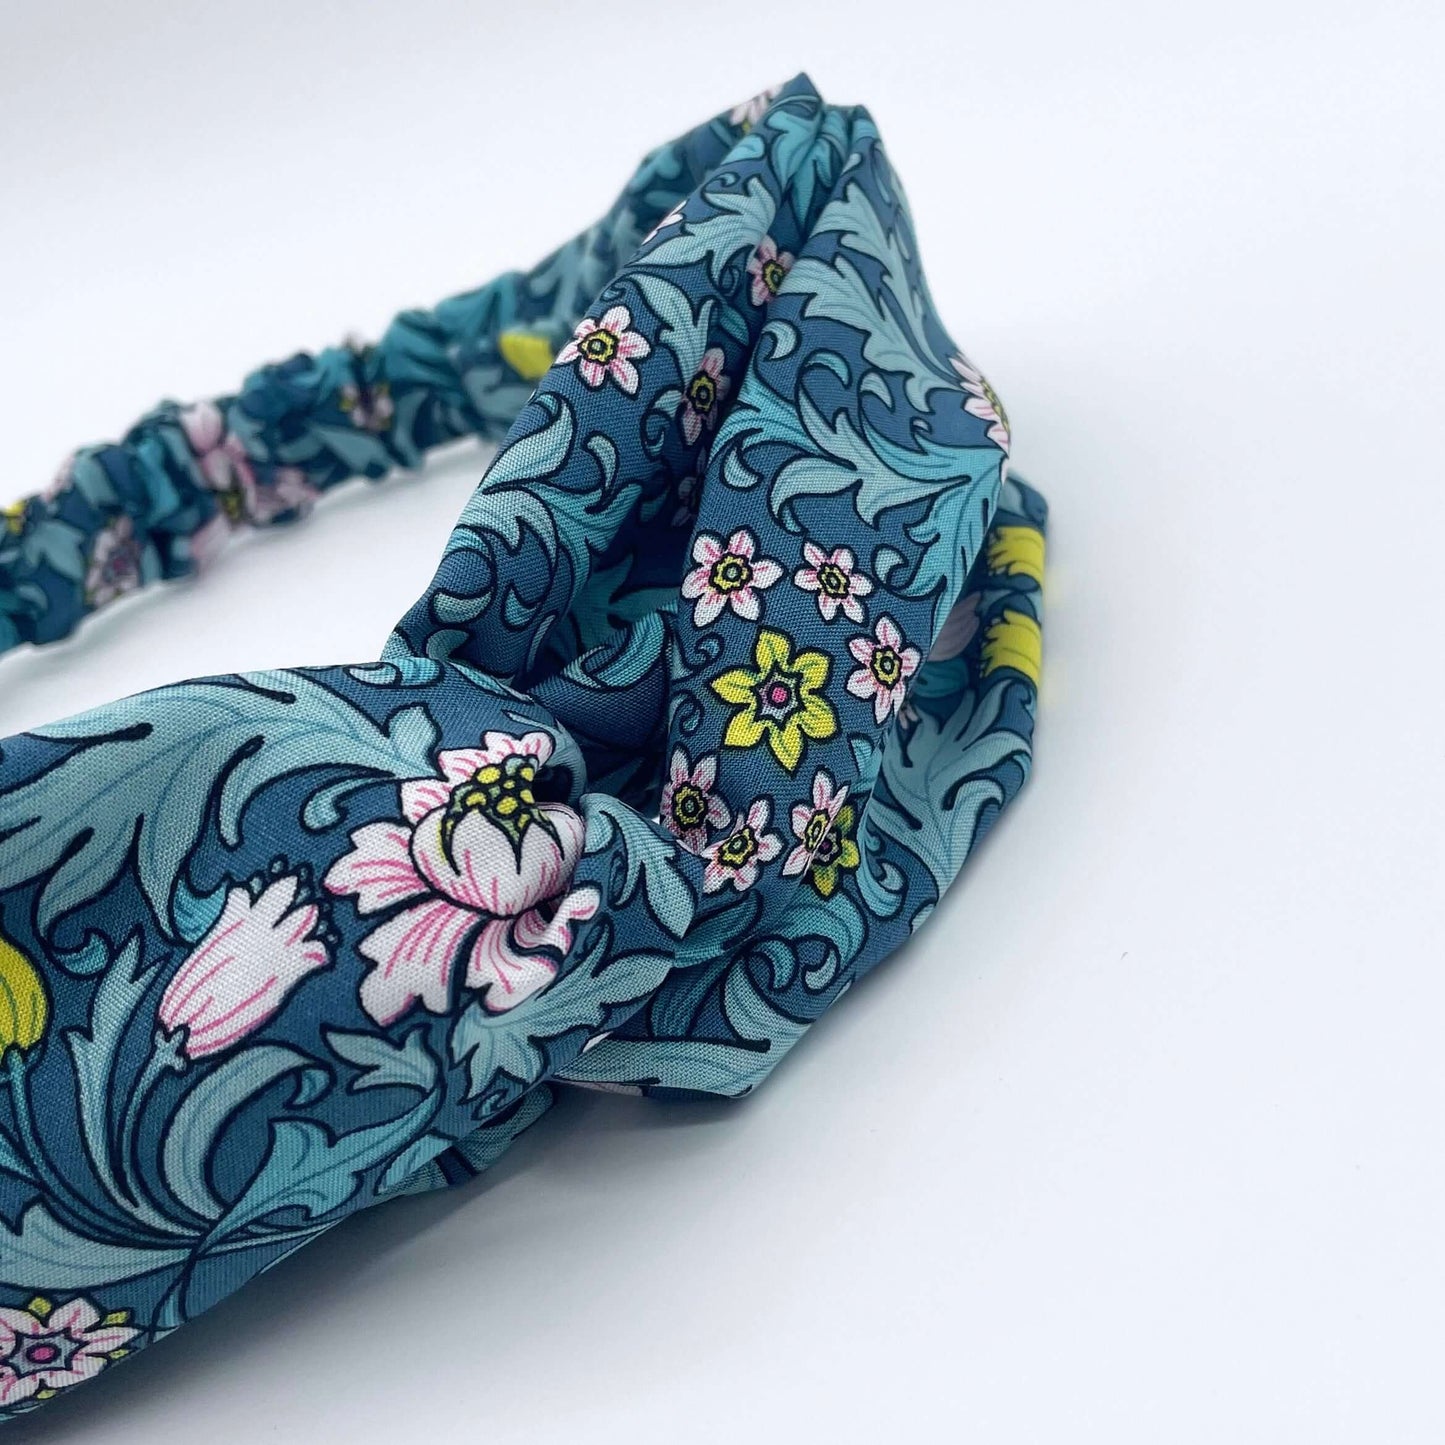 William Morris- Inspired Twist Headband in Blue with flowers and leaves print